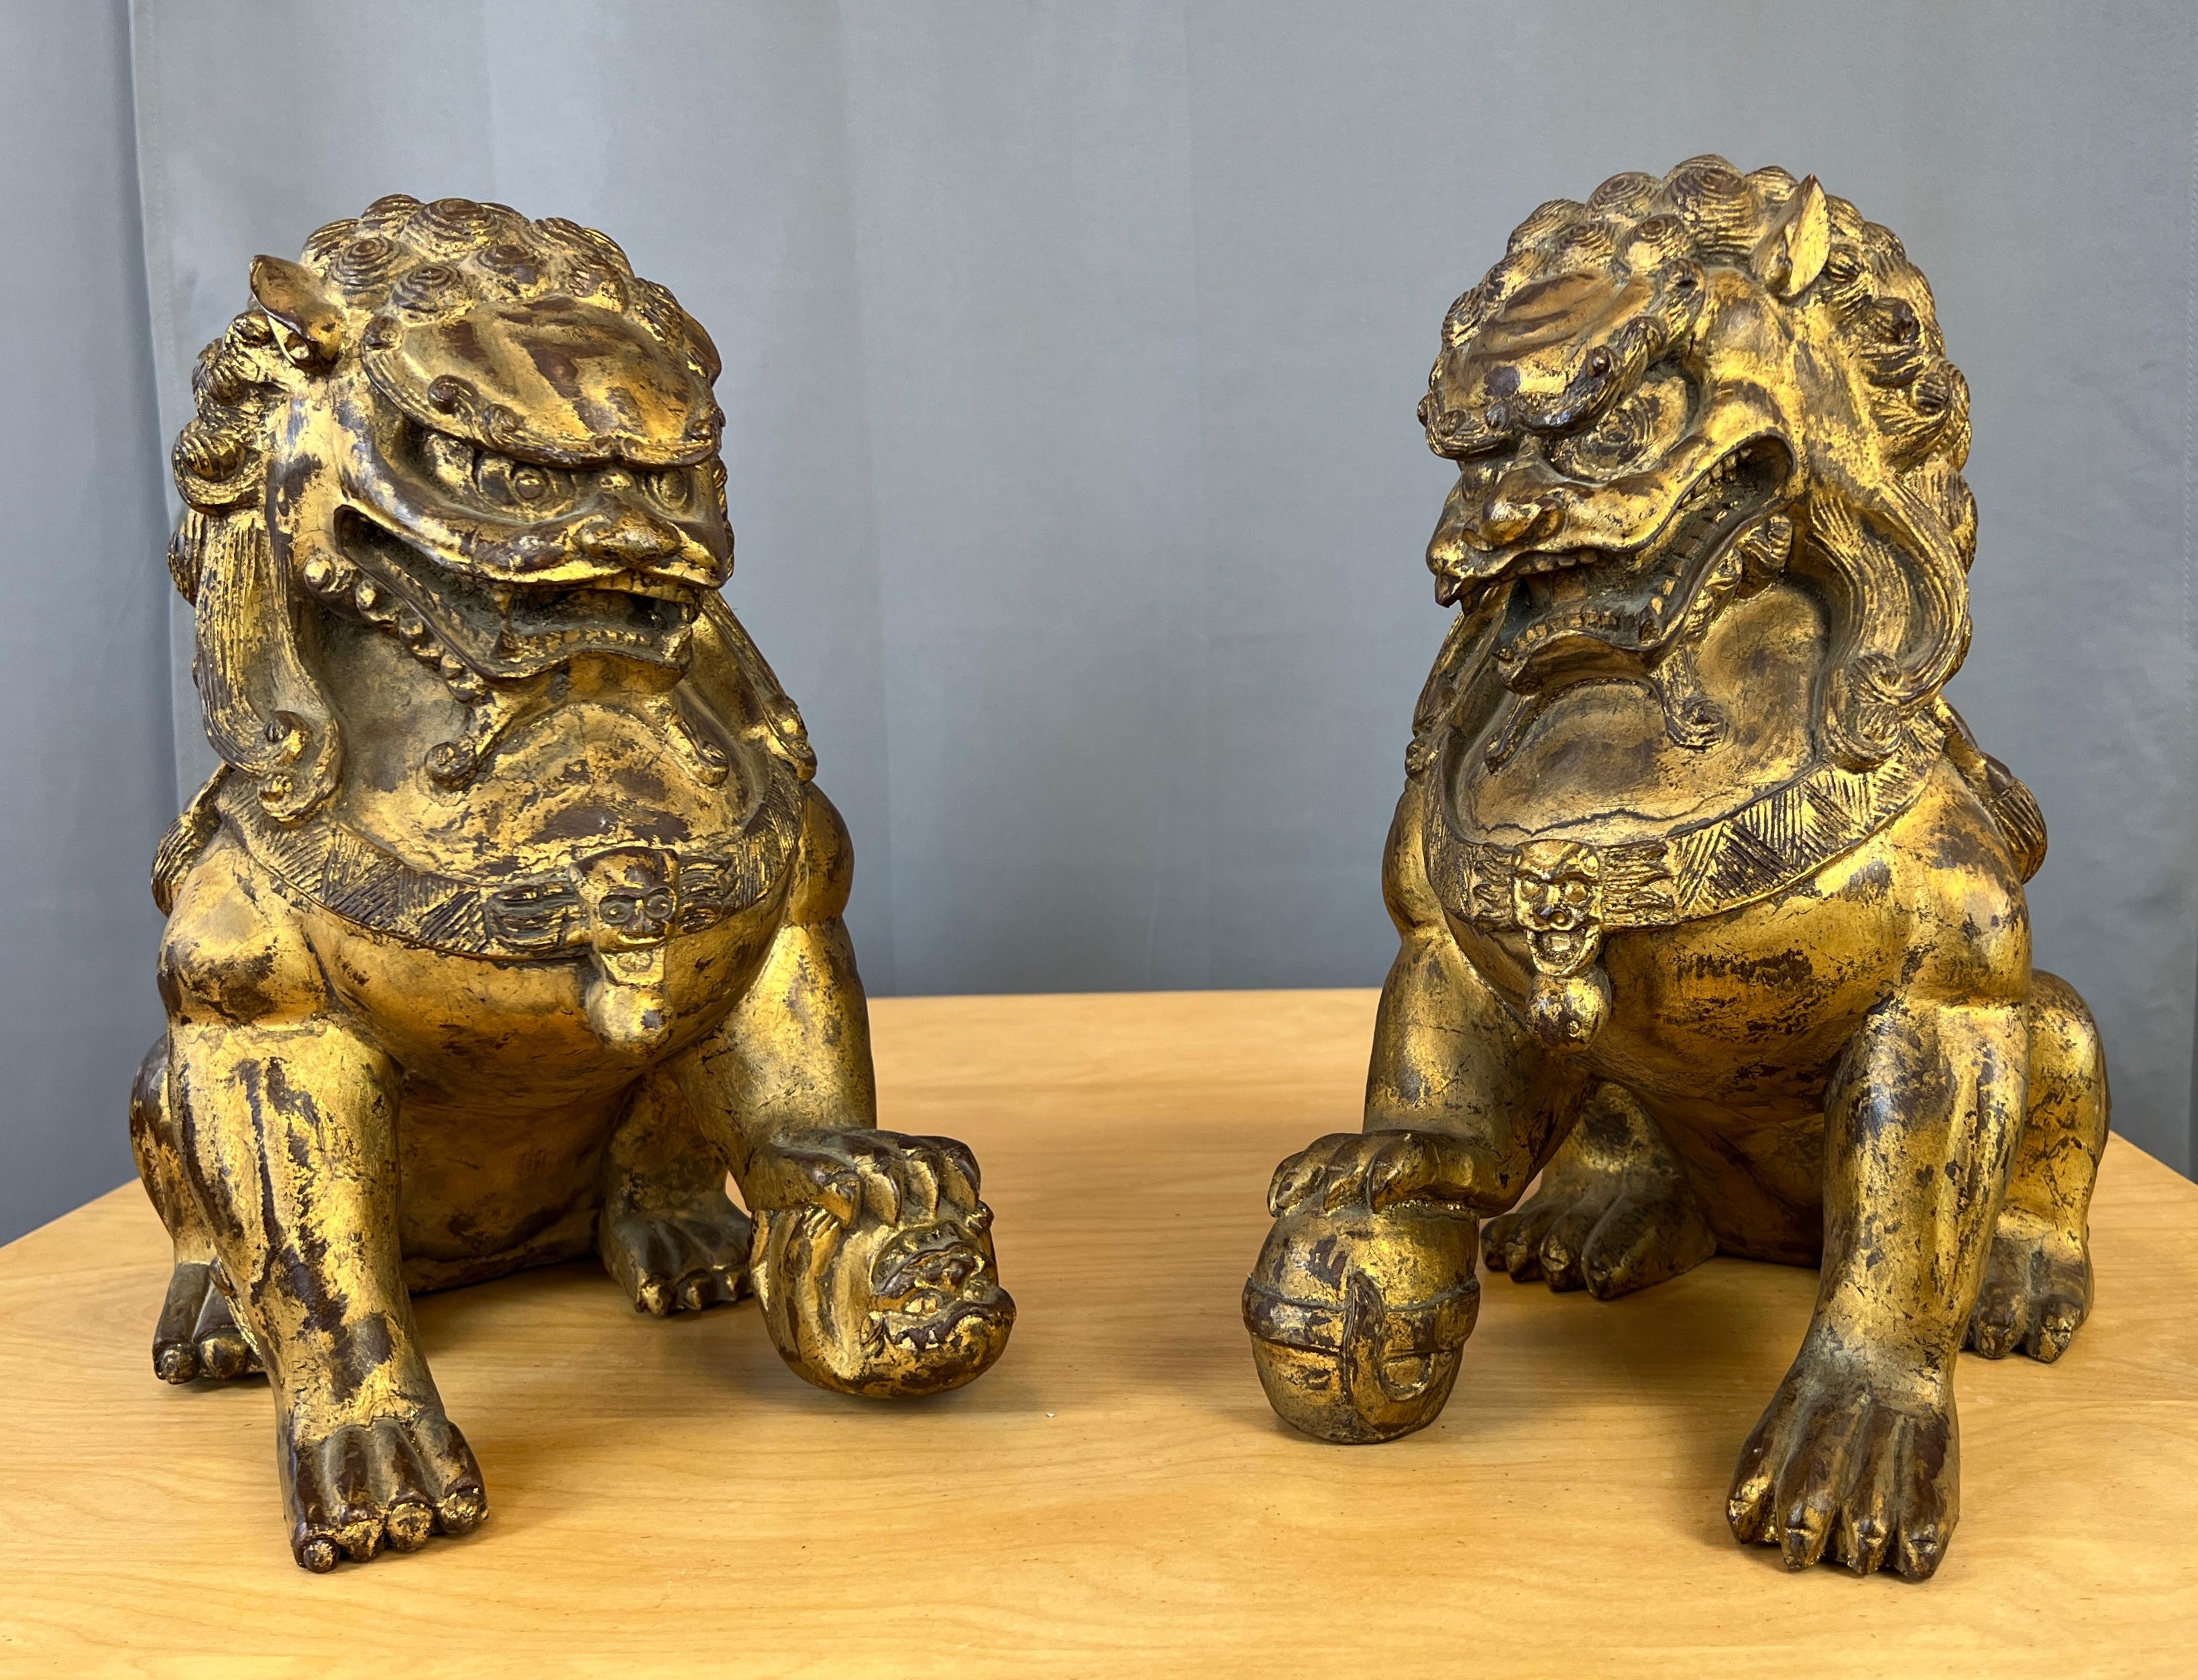 Offered here are a pair vintage Chinese gilt and carved wood Foo Dog/Guardian Lions figurines
Wonderful craftsmanship with the hand carving that has gone into this pair, from the paws stepping on a upturned little monster on one, and something in